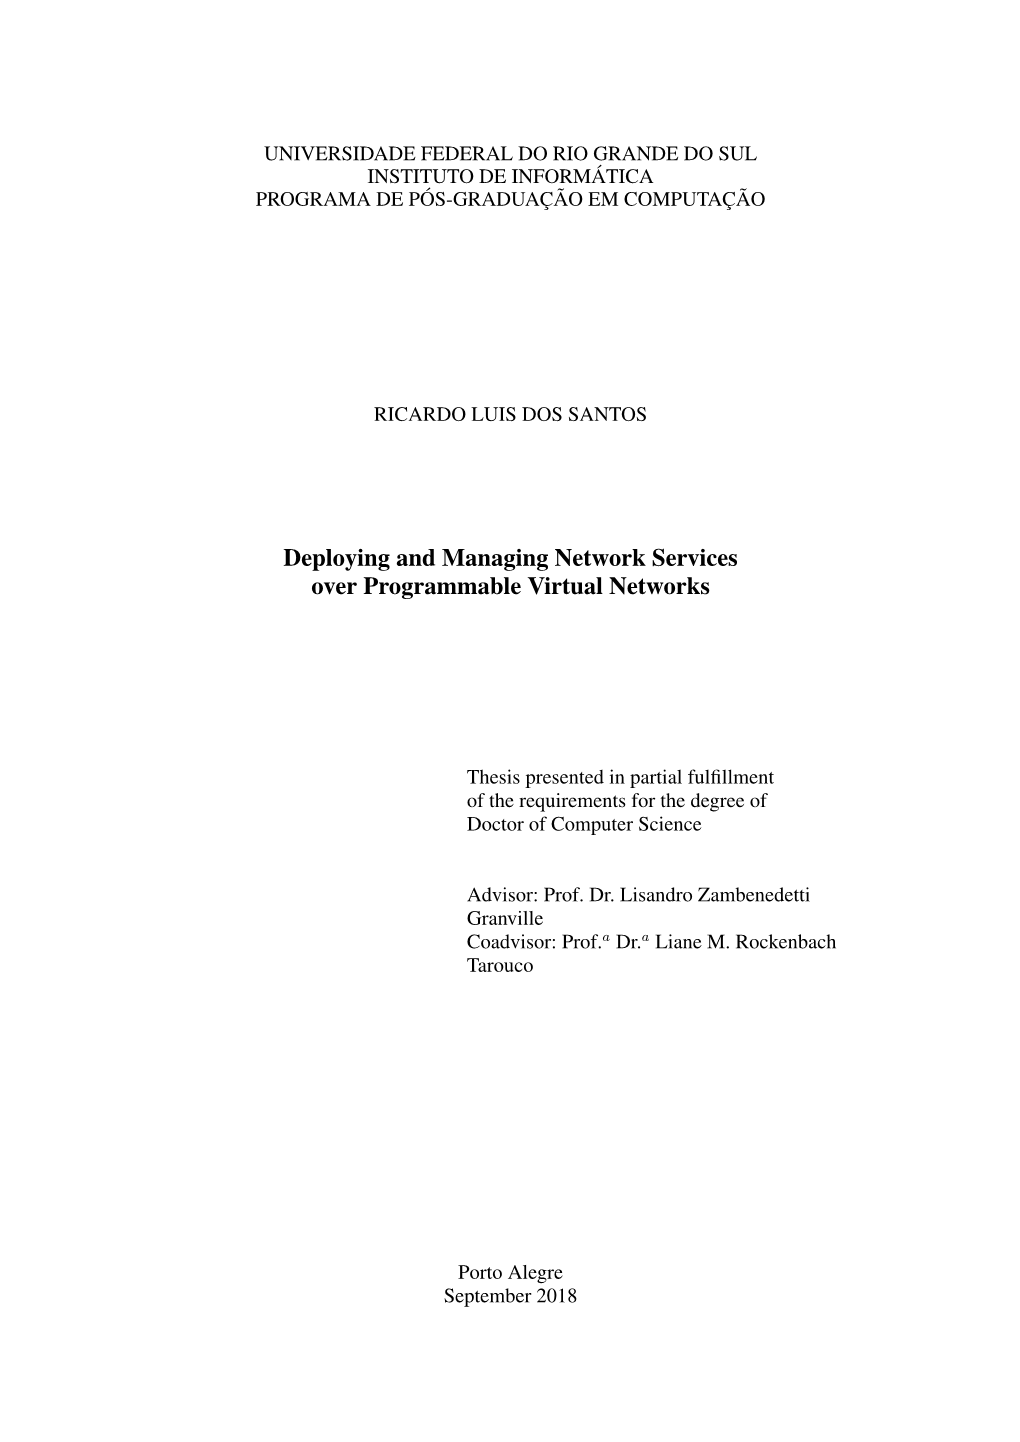 Deploying and Managing Network Services Over Programmable Virtual Networks